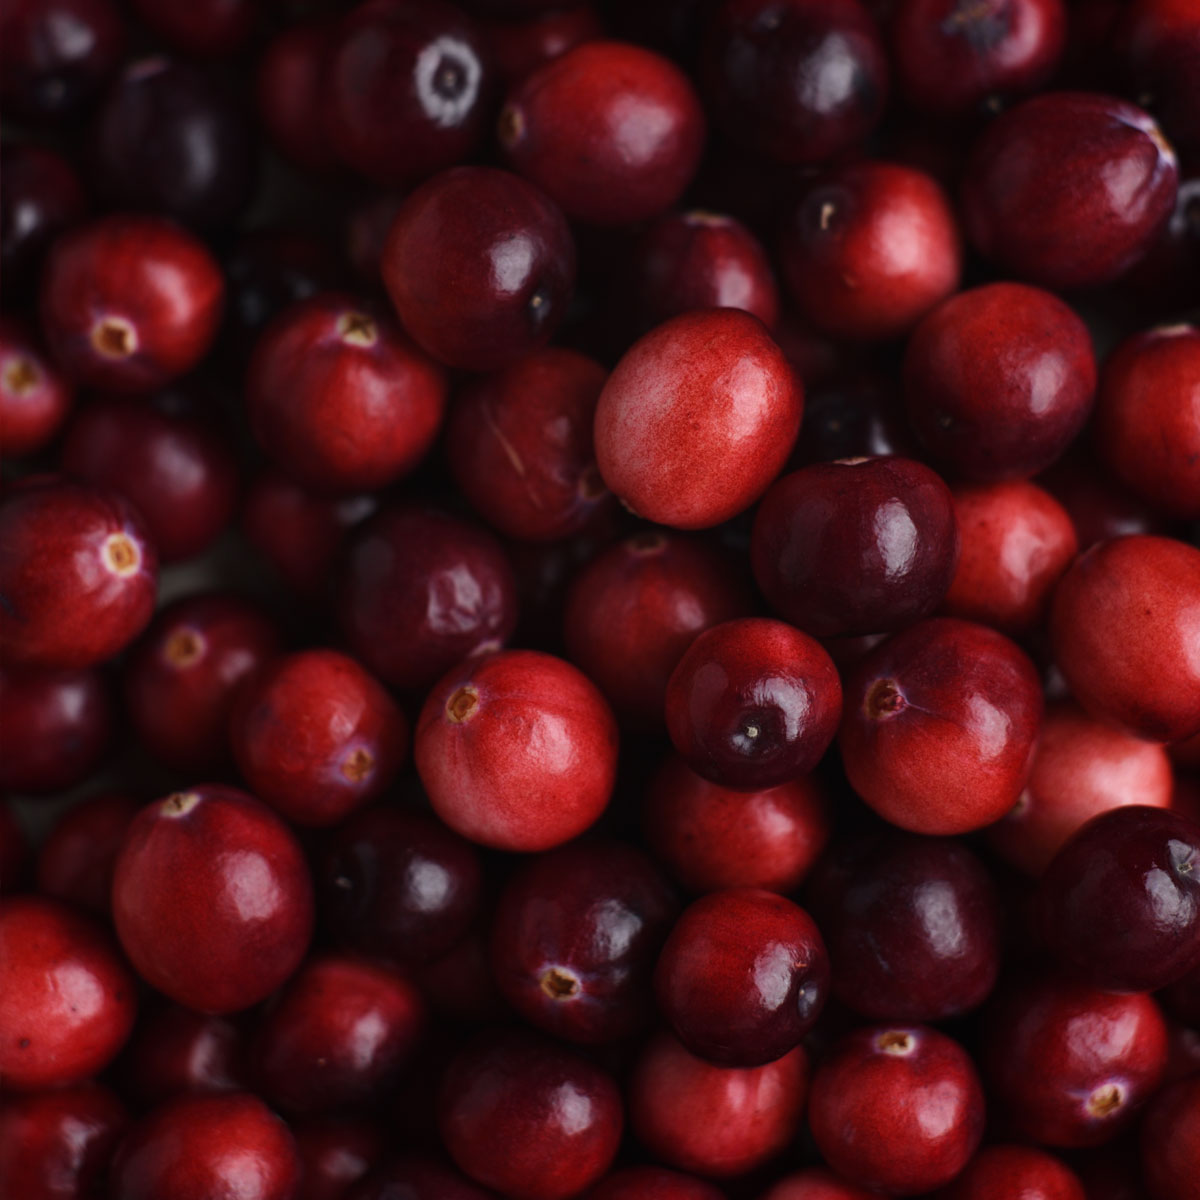 Cranberry Background - Rich and Vibrant